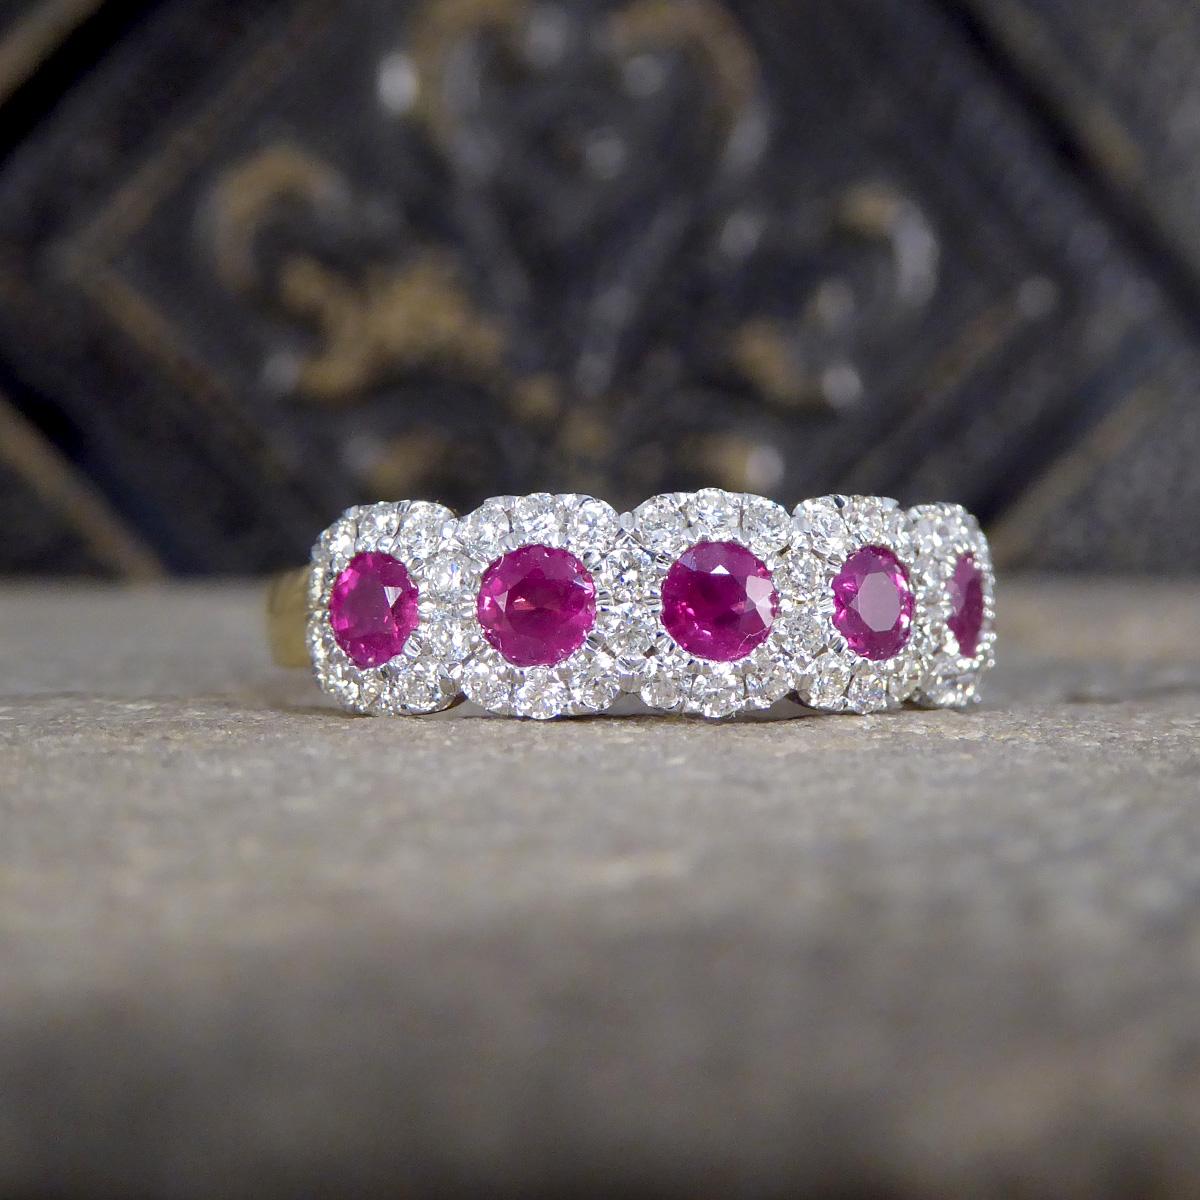 An extraordinary ring that combines opulence with intricate design. Crafted with unparalleled attention to detail, this ring features a sextuple cluster of vibrant rubies and dazzling diamonds, set in a harmonious blend of 18ct yellow and white